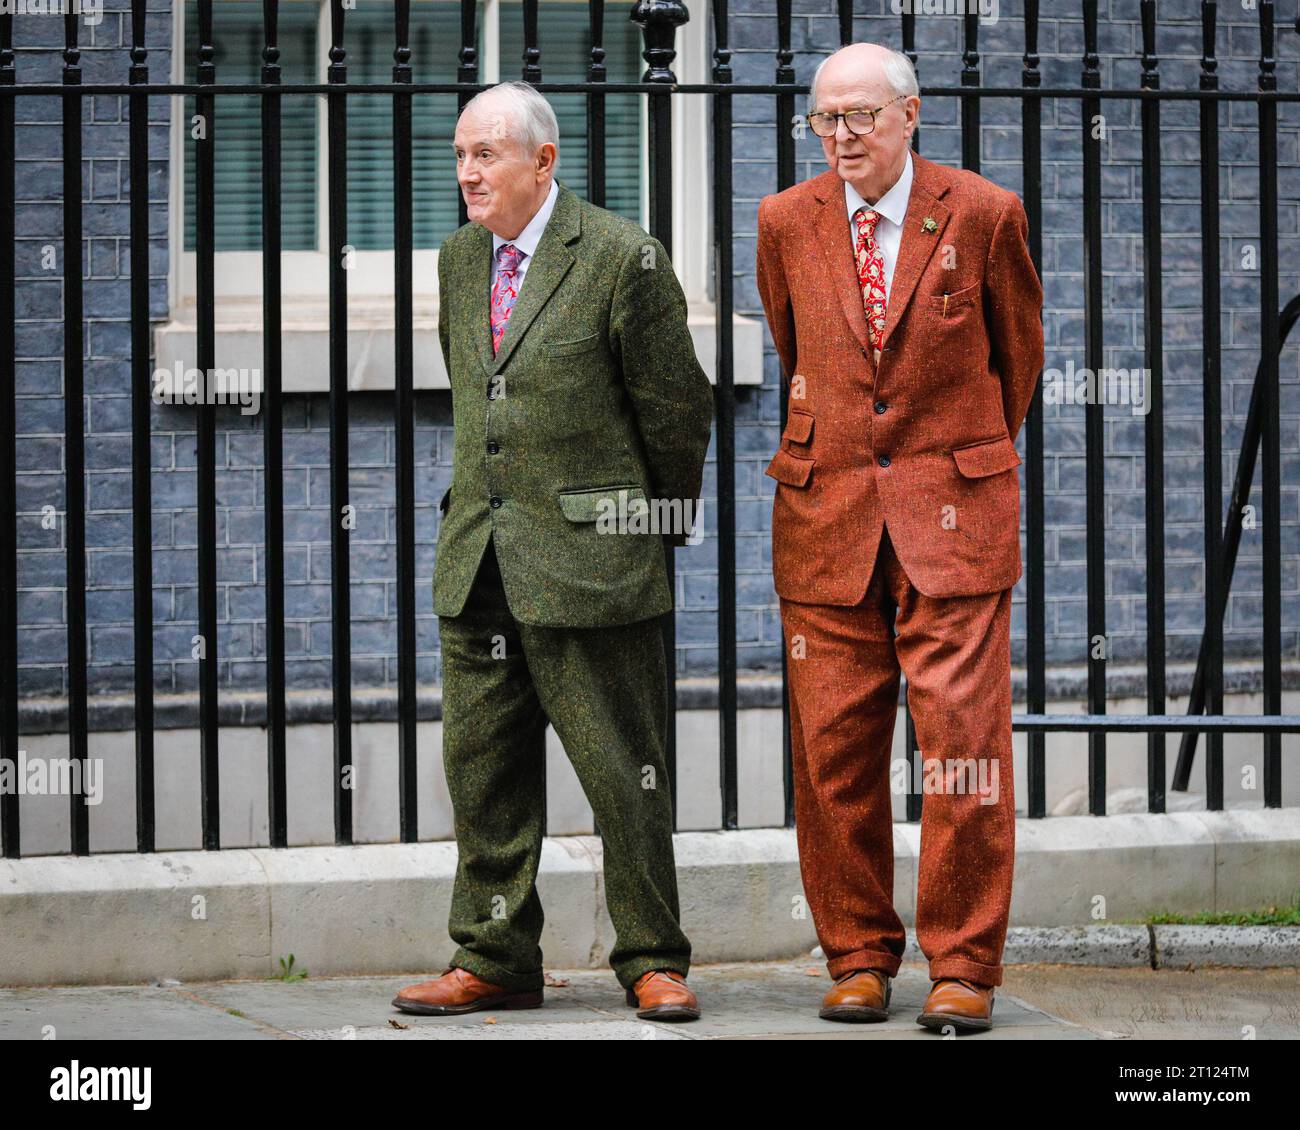 London, UK. 10th Oct, 2023. British artist duo Gilbert and George (Gilbert Prousch, sometimes referred to as Proesch, and George Passmore) attend a reception at 10 Downing Street to celebrate 20 years of Frieze London Art Fair. They arrive together with other invitees. Frieze 2023 will officially start tomorrow with its preview day. Credit: Imageplotter/Alamy Live News Stock Photo